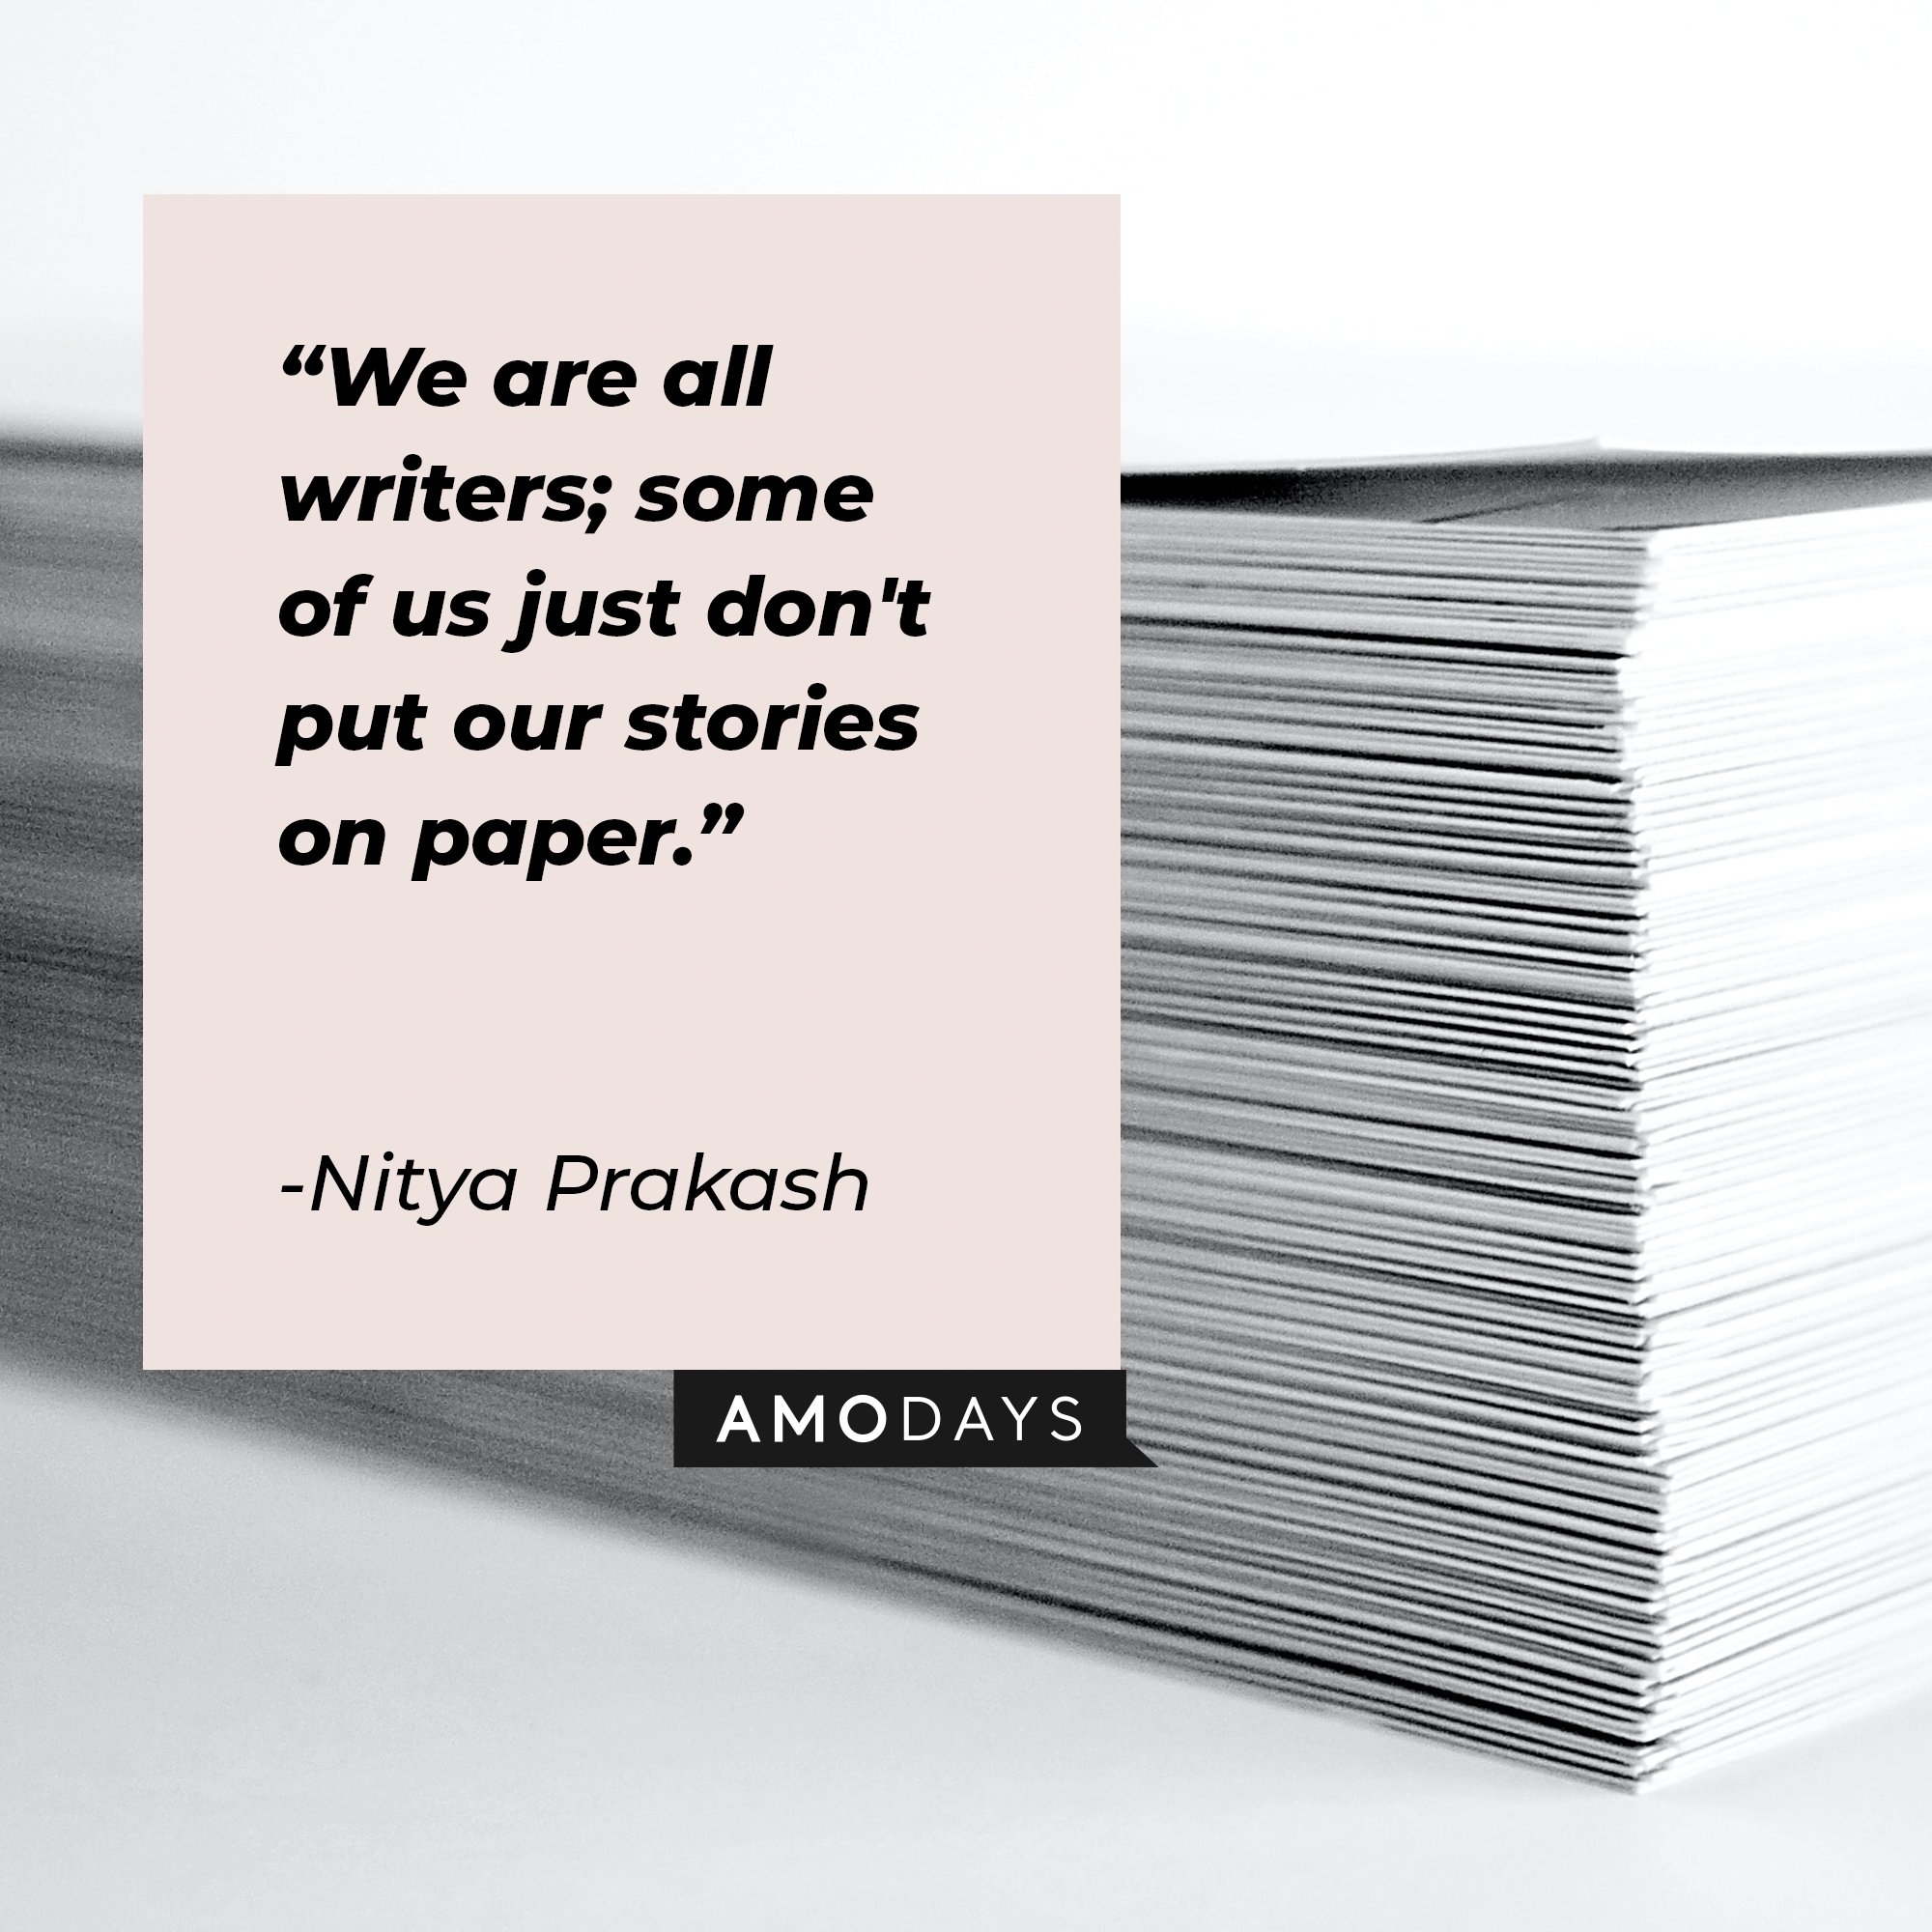 Nitya Prakash’s quote: "We are all writers; some of us just don't put our stories on paper."  | Image: AmoDays